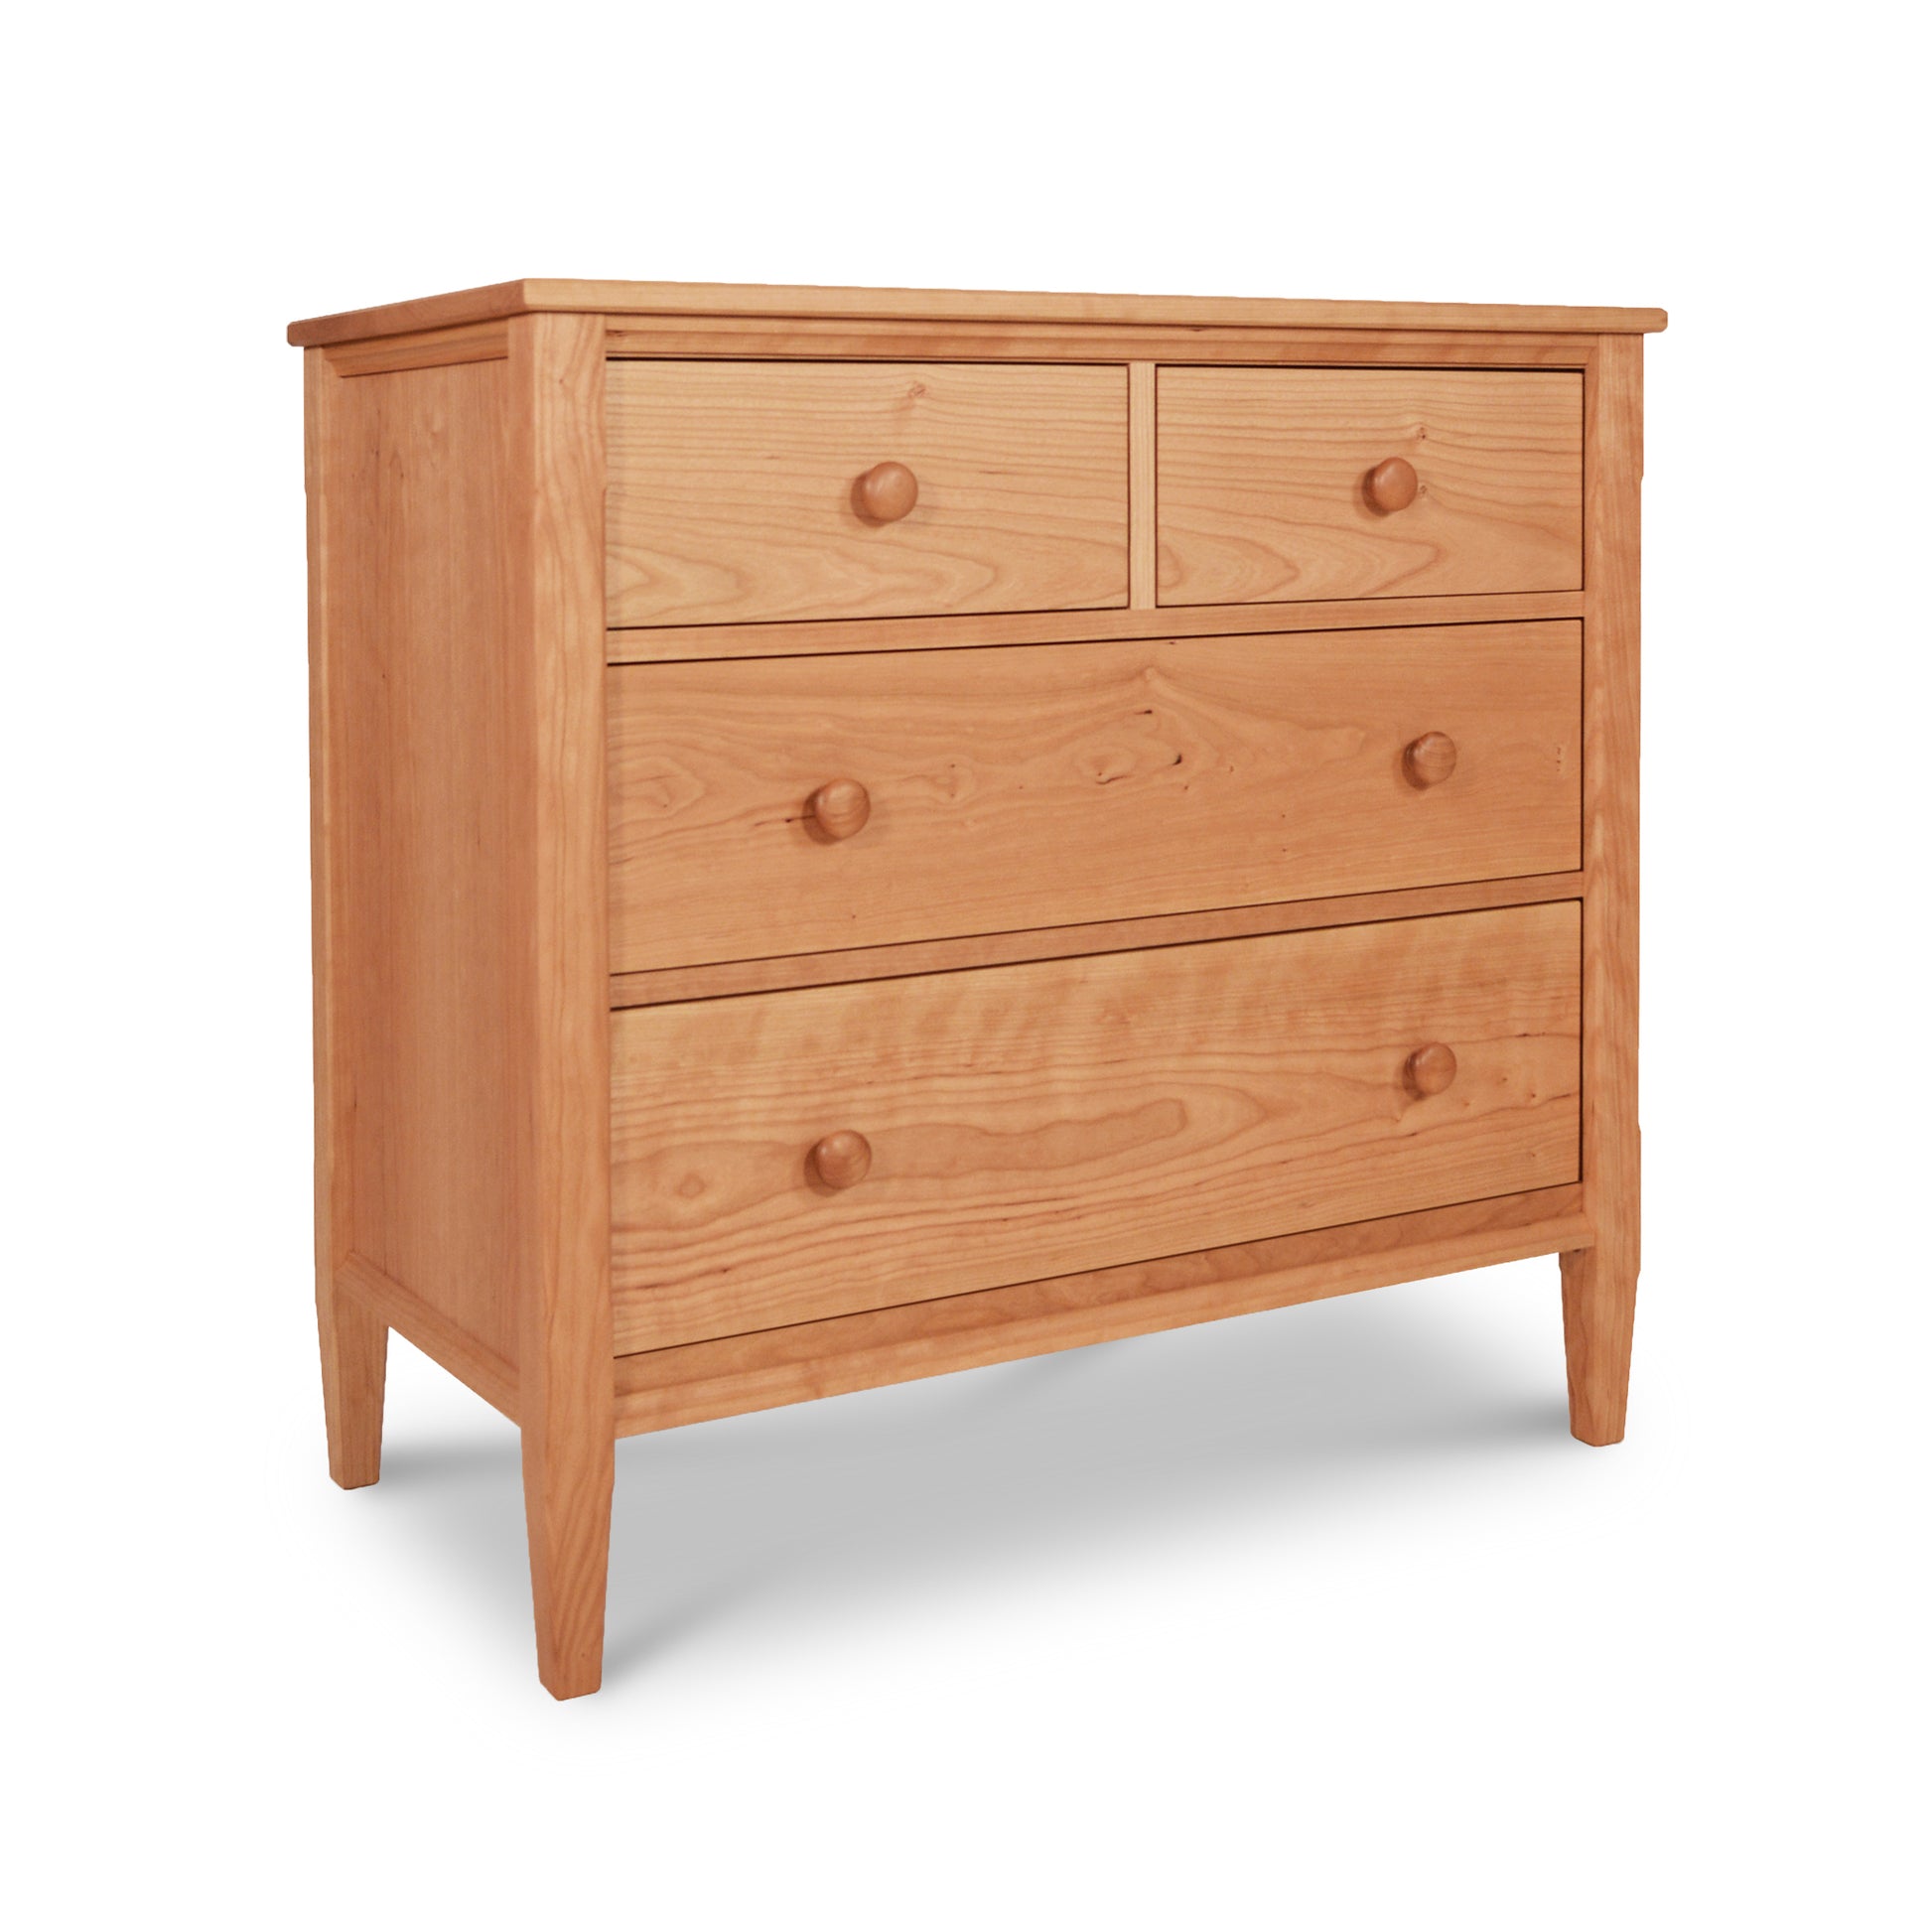 A handmade Maple Corner Woodworks Vermont Shaker 4-Drawer Chest on a white background.